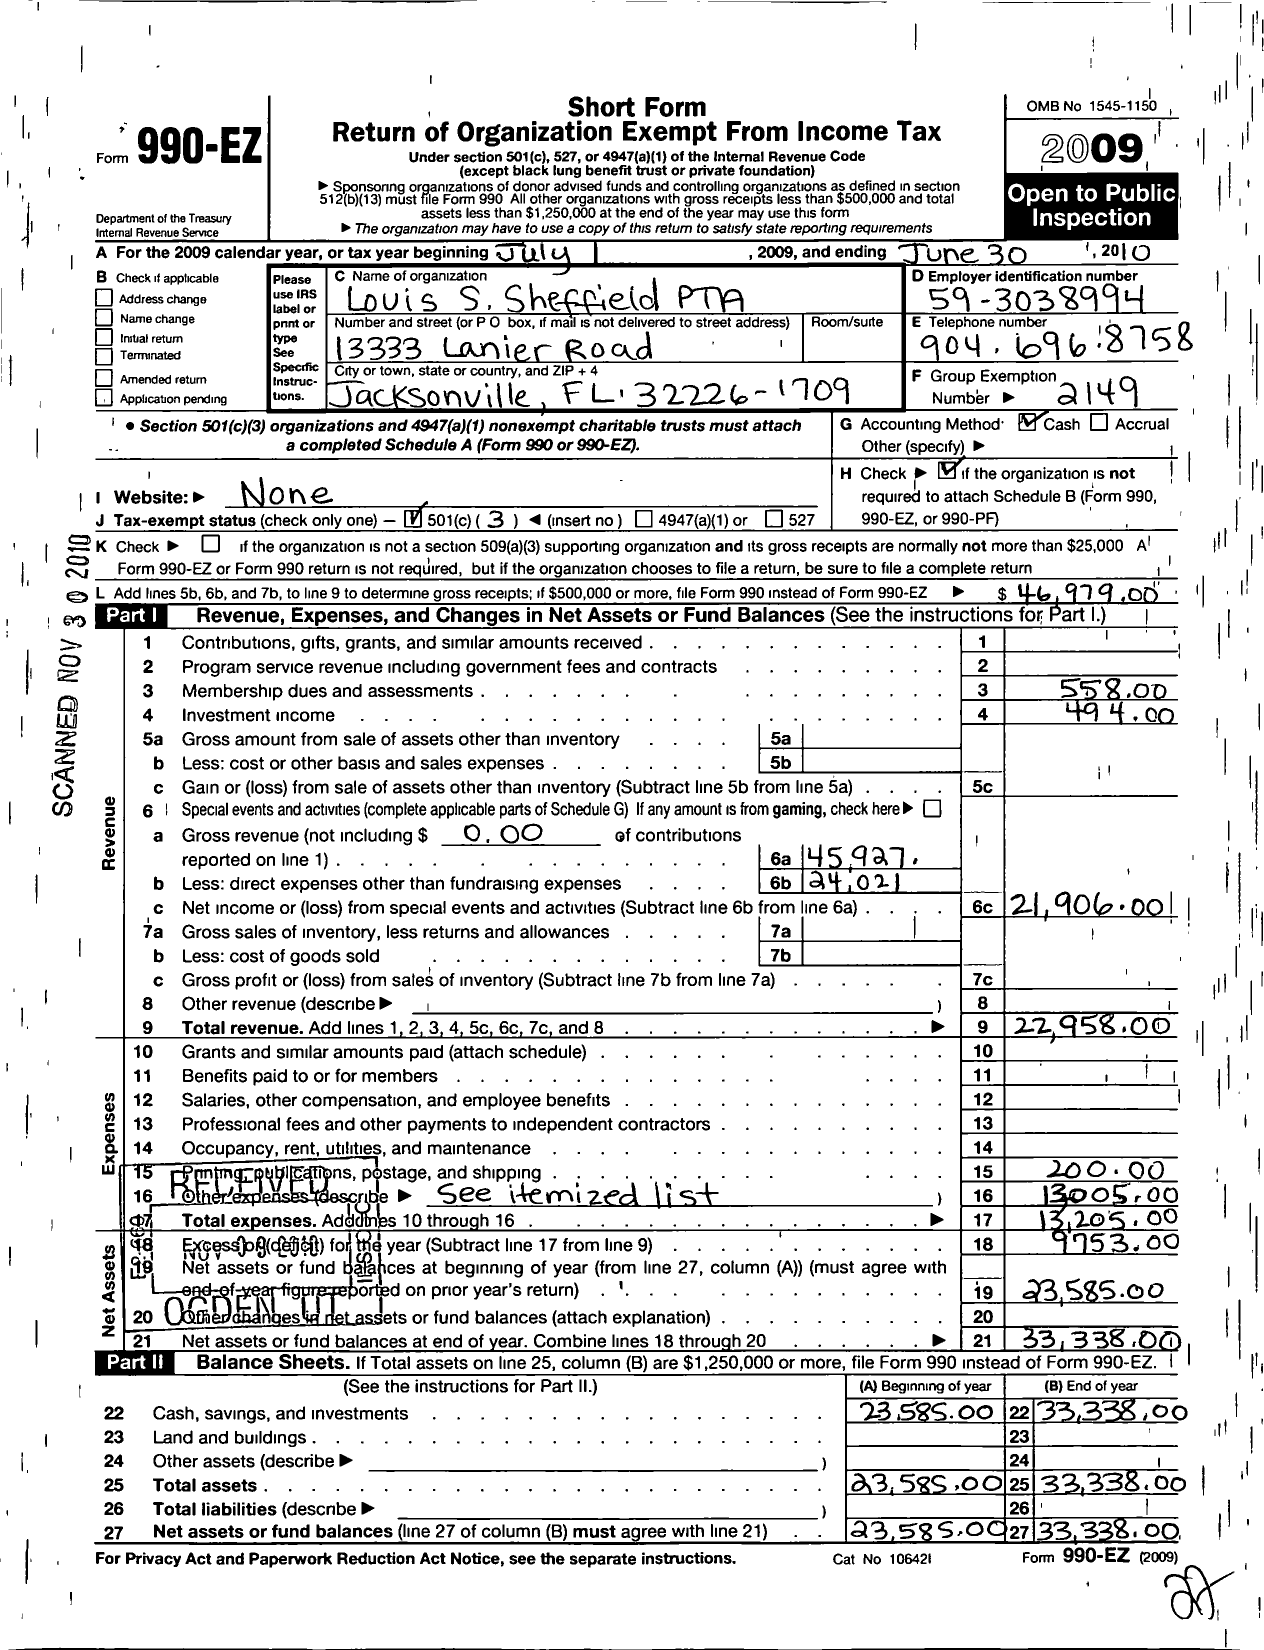 Image of first page of 2009 Form 990EZ for PTA Florida Congress - Louis S Sheffield PTA